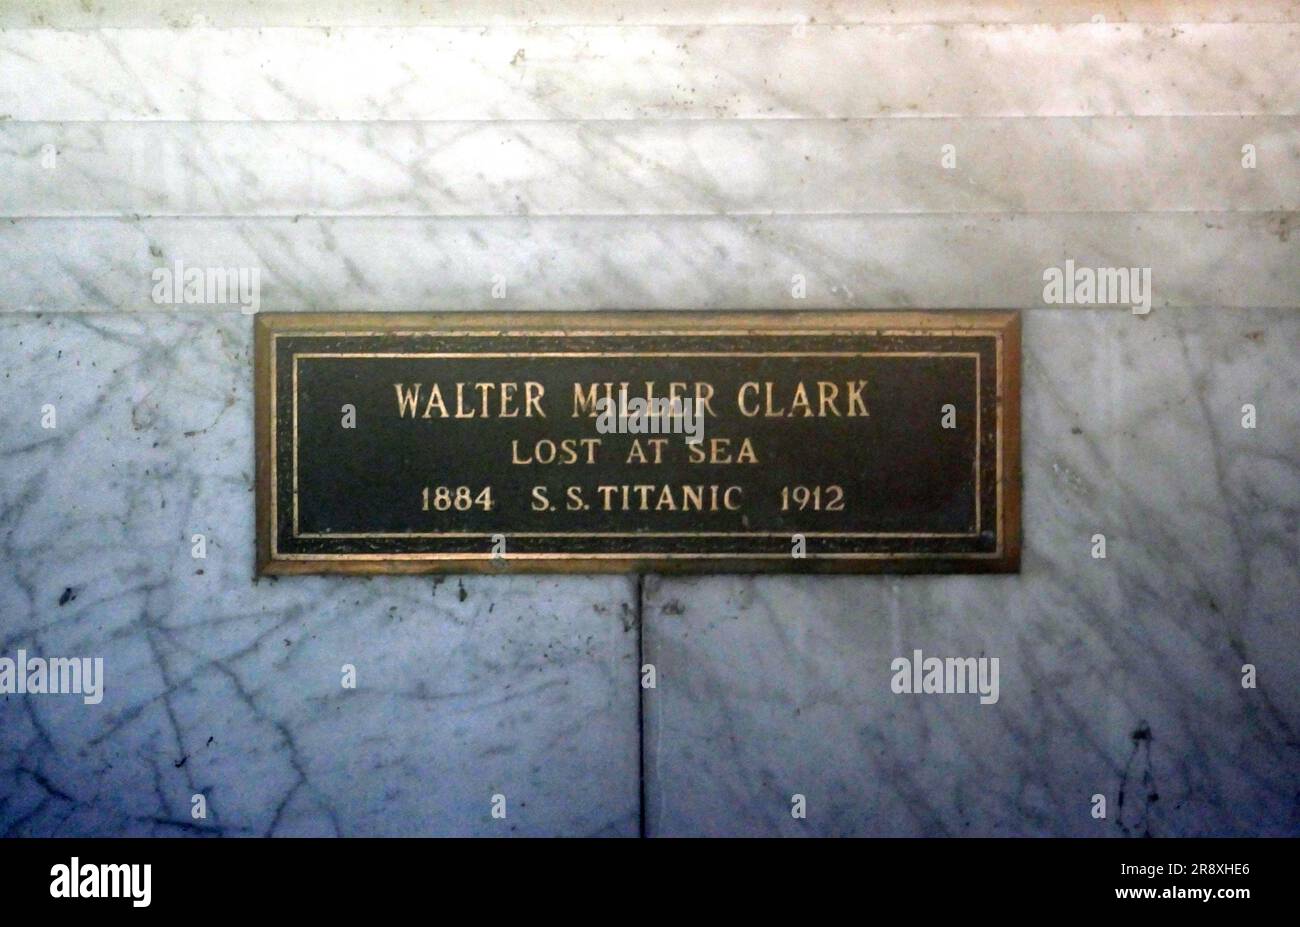 Los Angeles, California, USA 22nd June 2023 Titanic Victim Walter Miller Clark Grave at Hollywood Forever Cemetery on June 22, 2023 in Los Angeles, California, USA. Photo by Barry King/Alamy Stock Photo Stock Photo